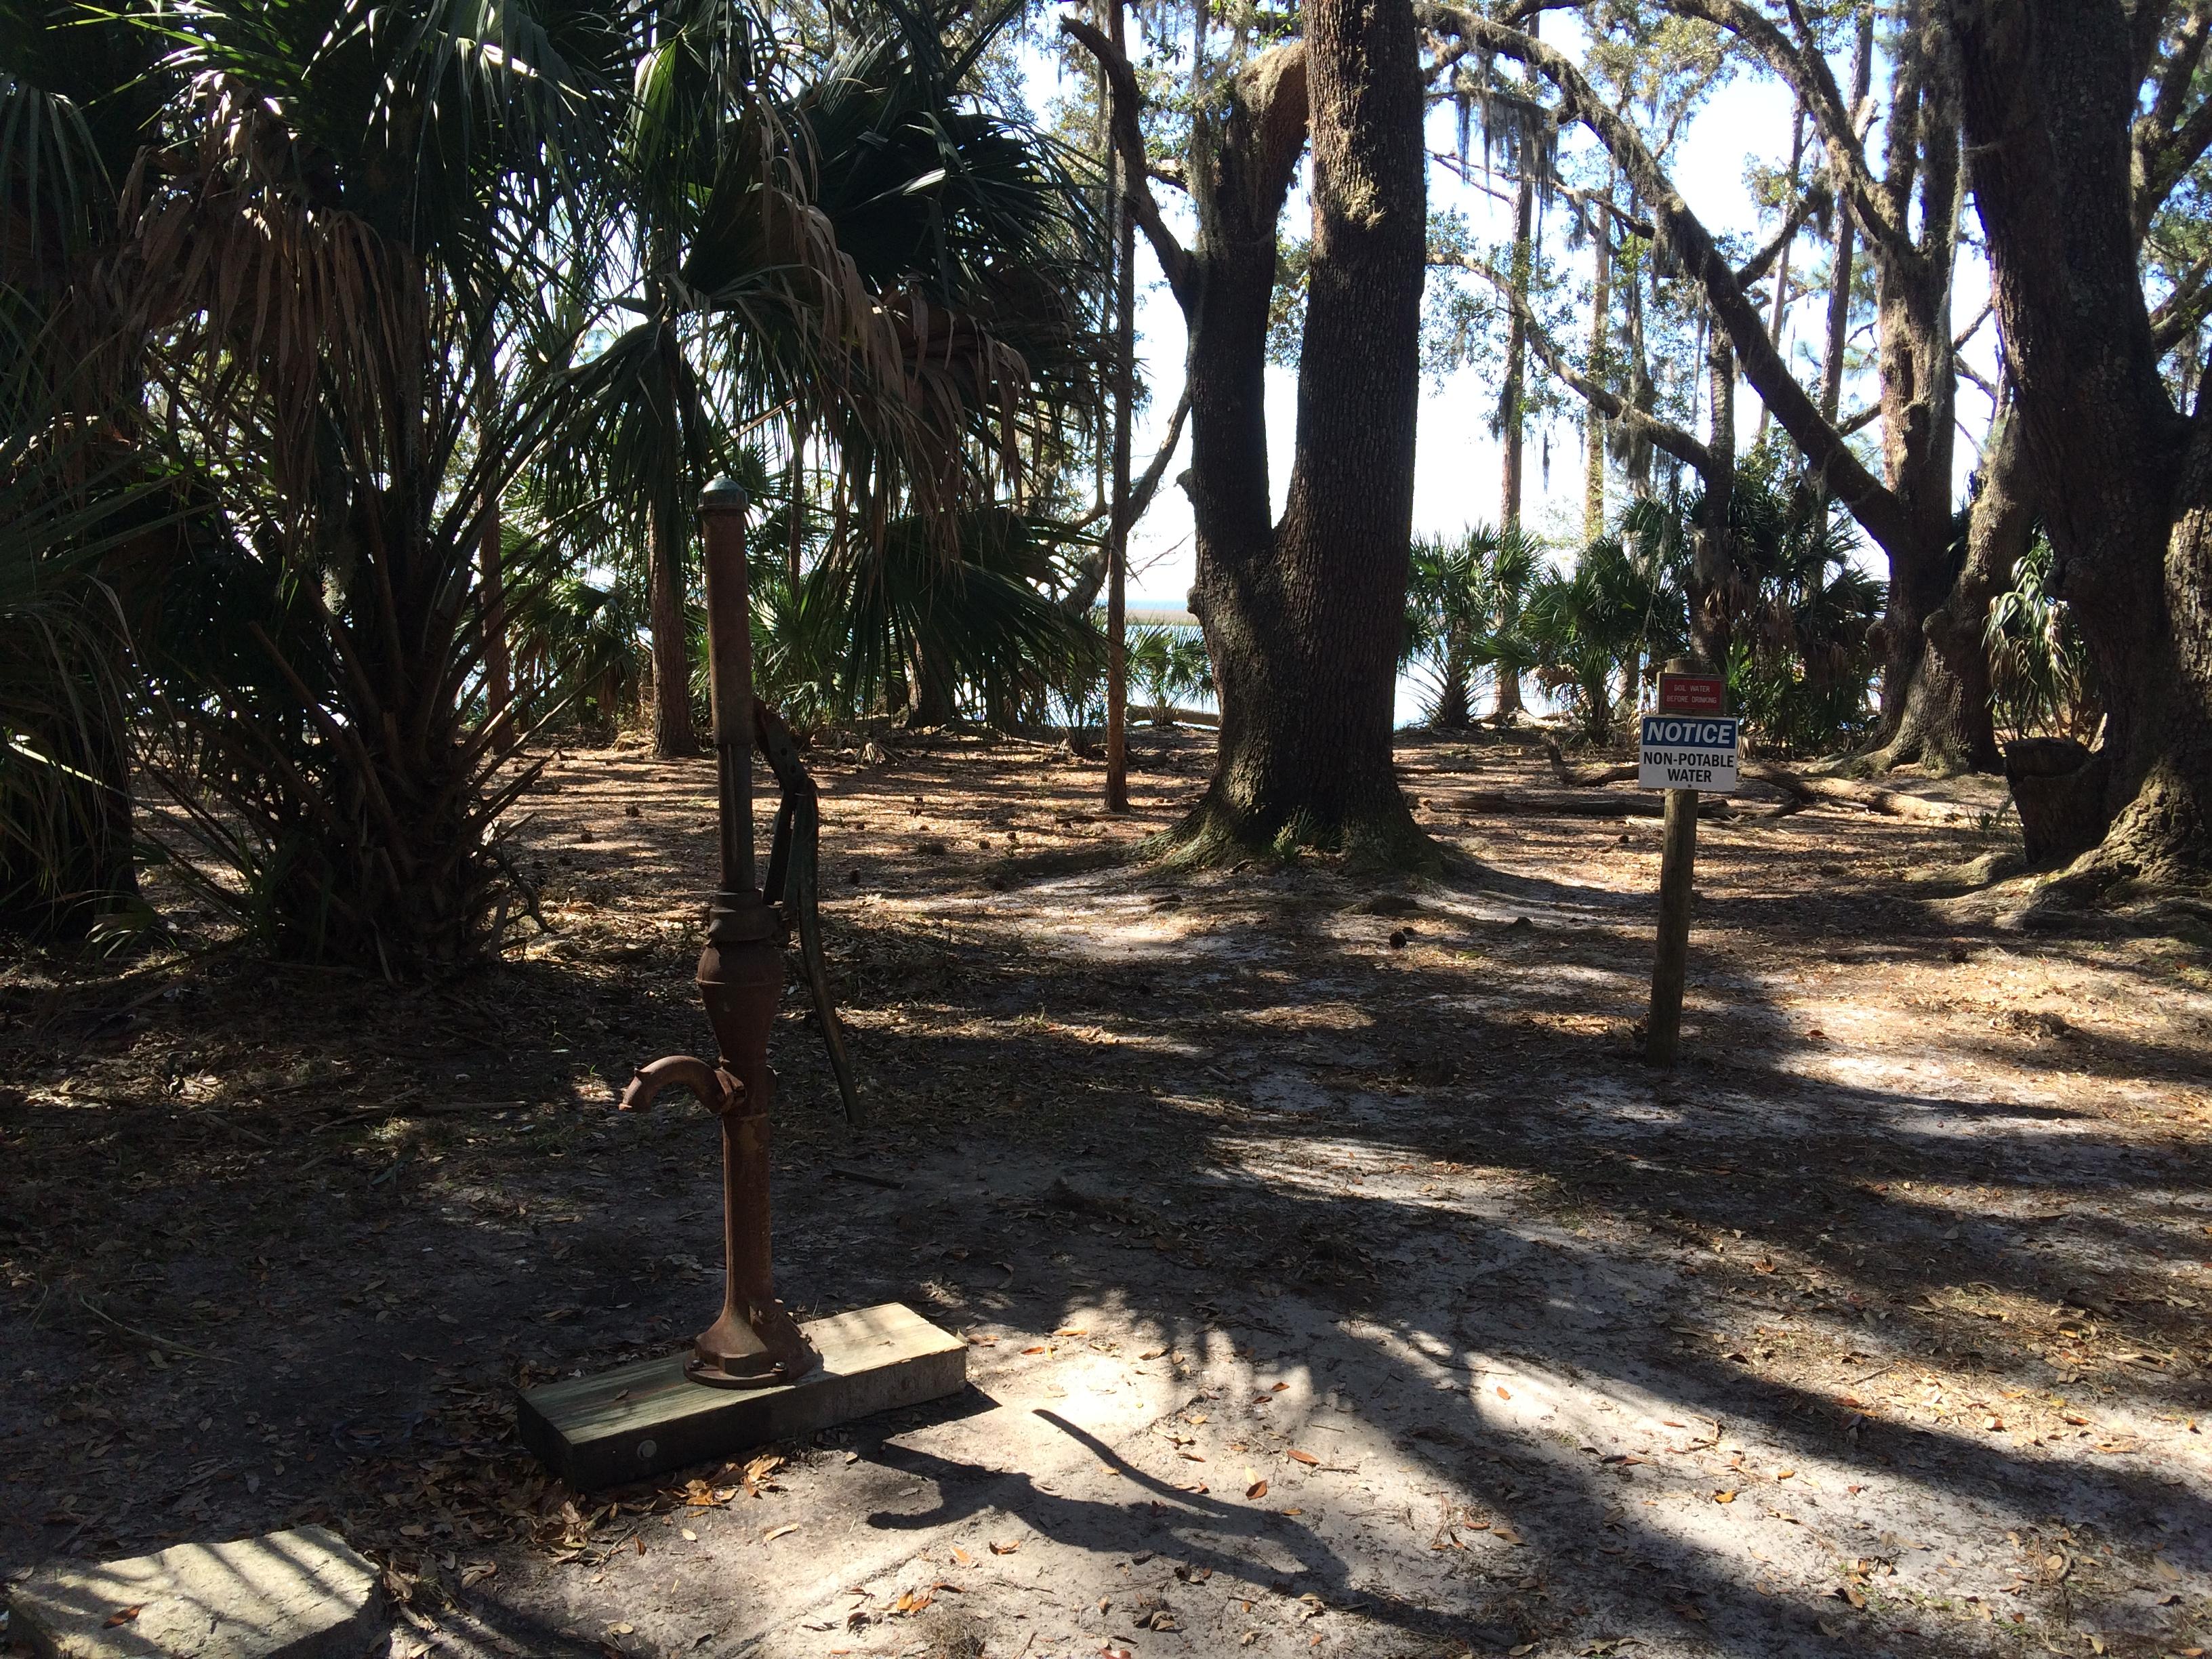 campsite along water with palm trees and water pump